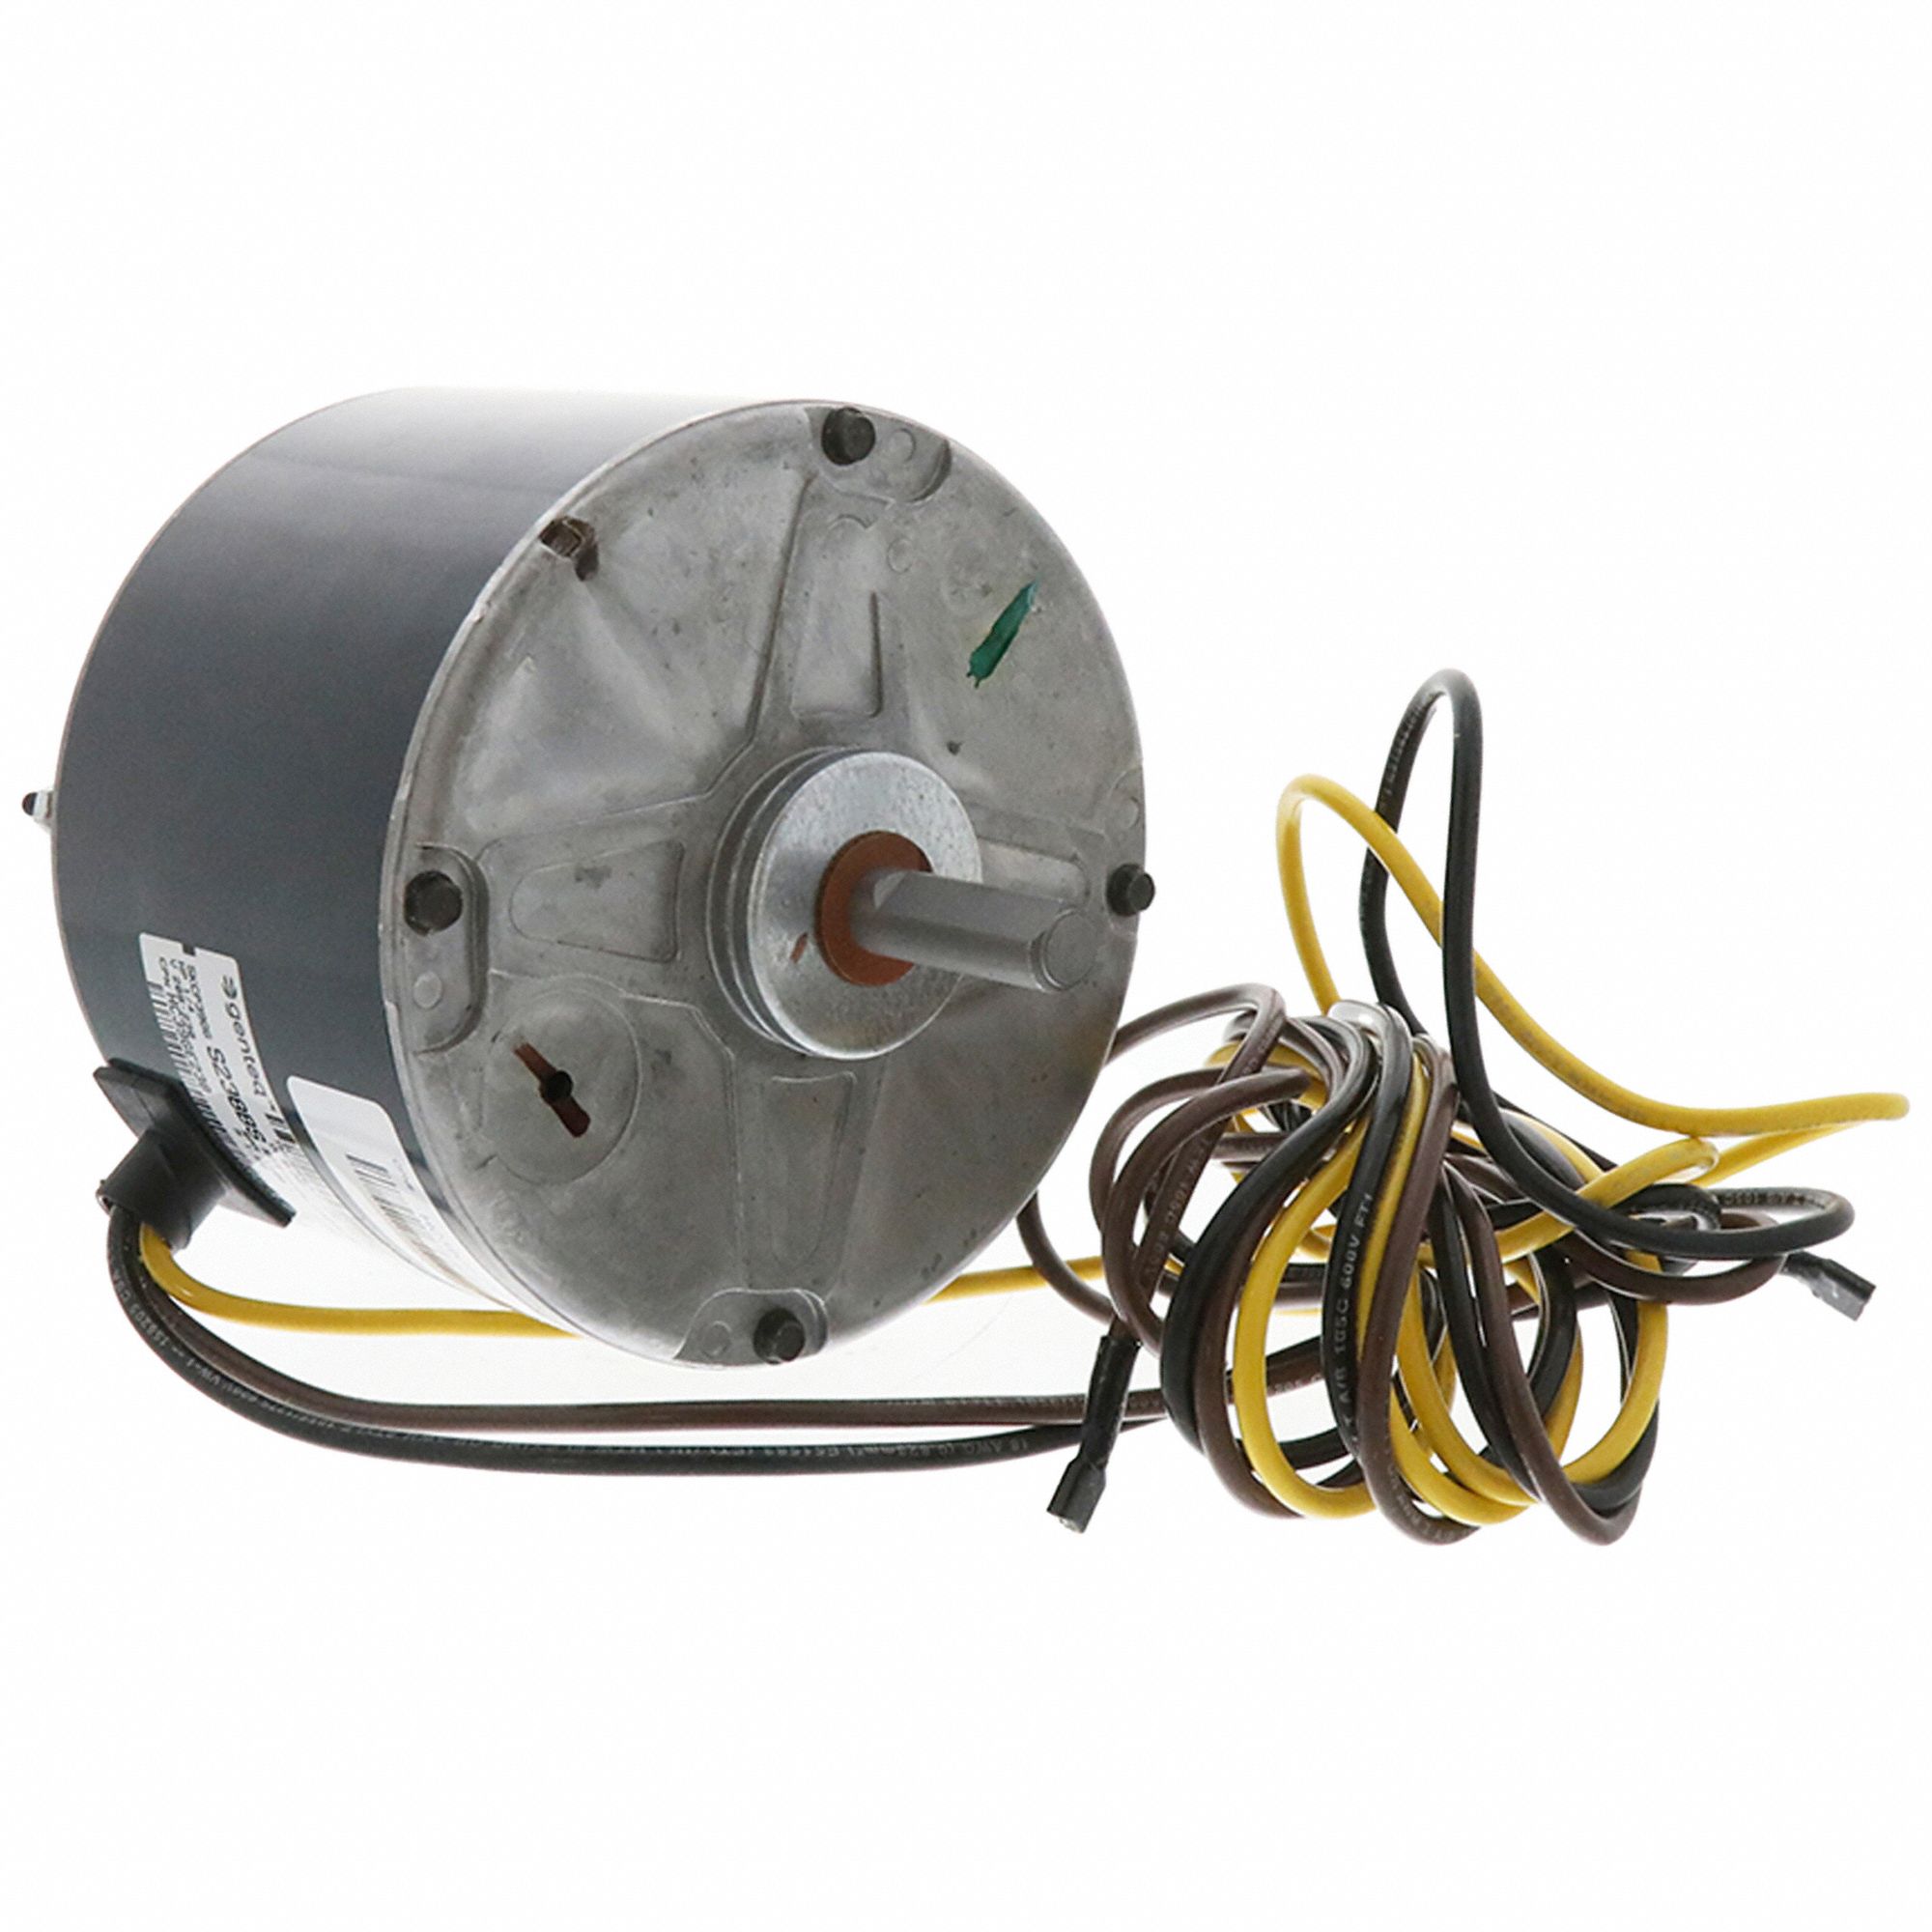 Motor: Fits RCD Parts Brand, Carrier, Black